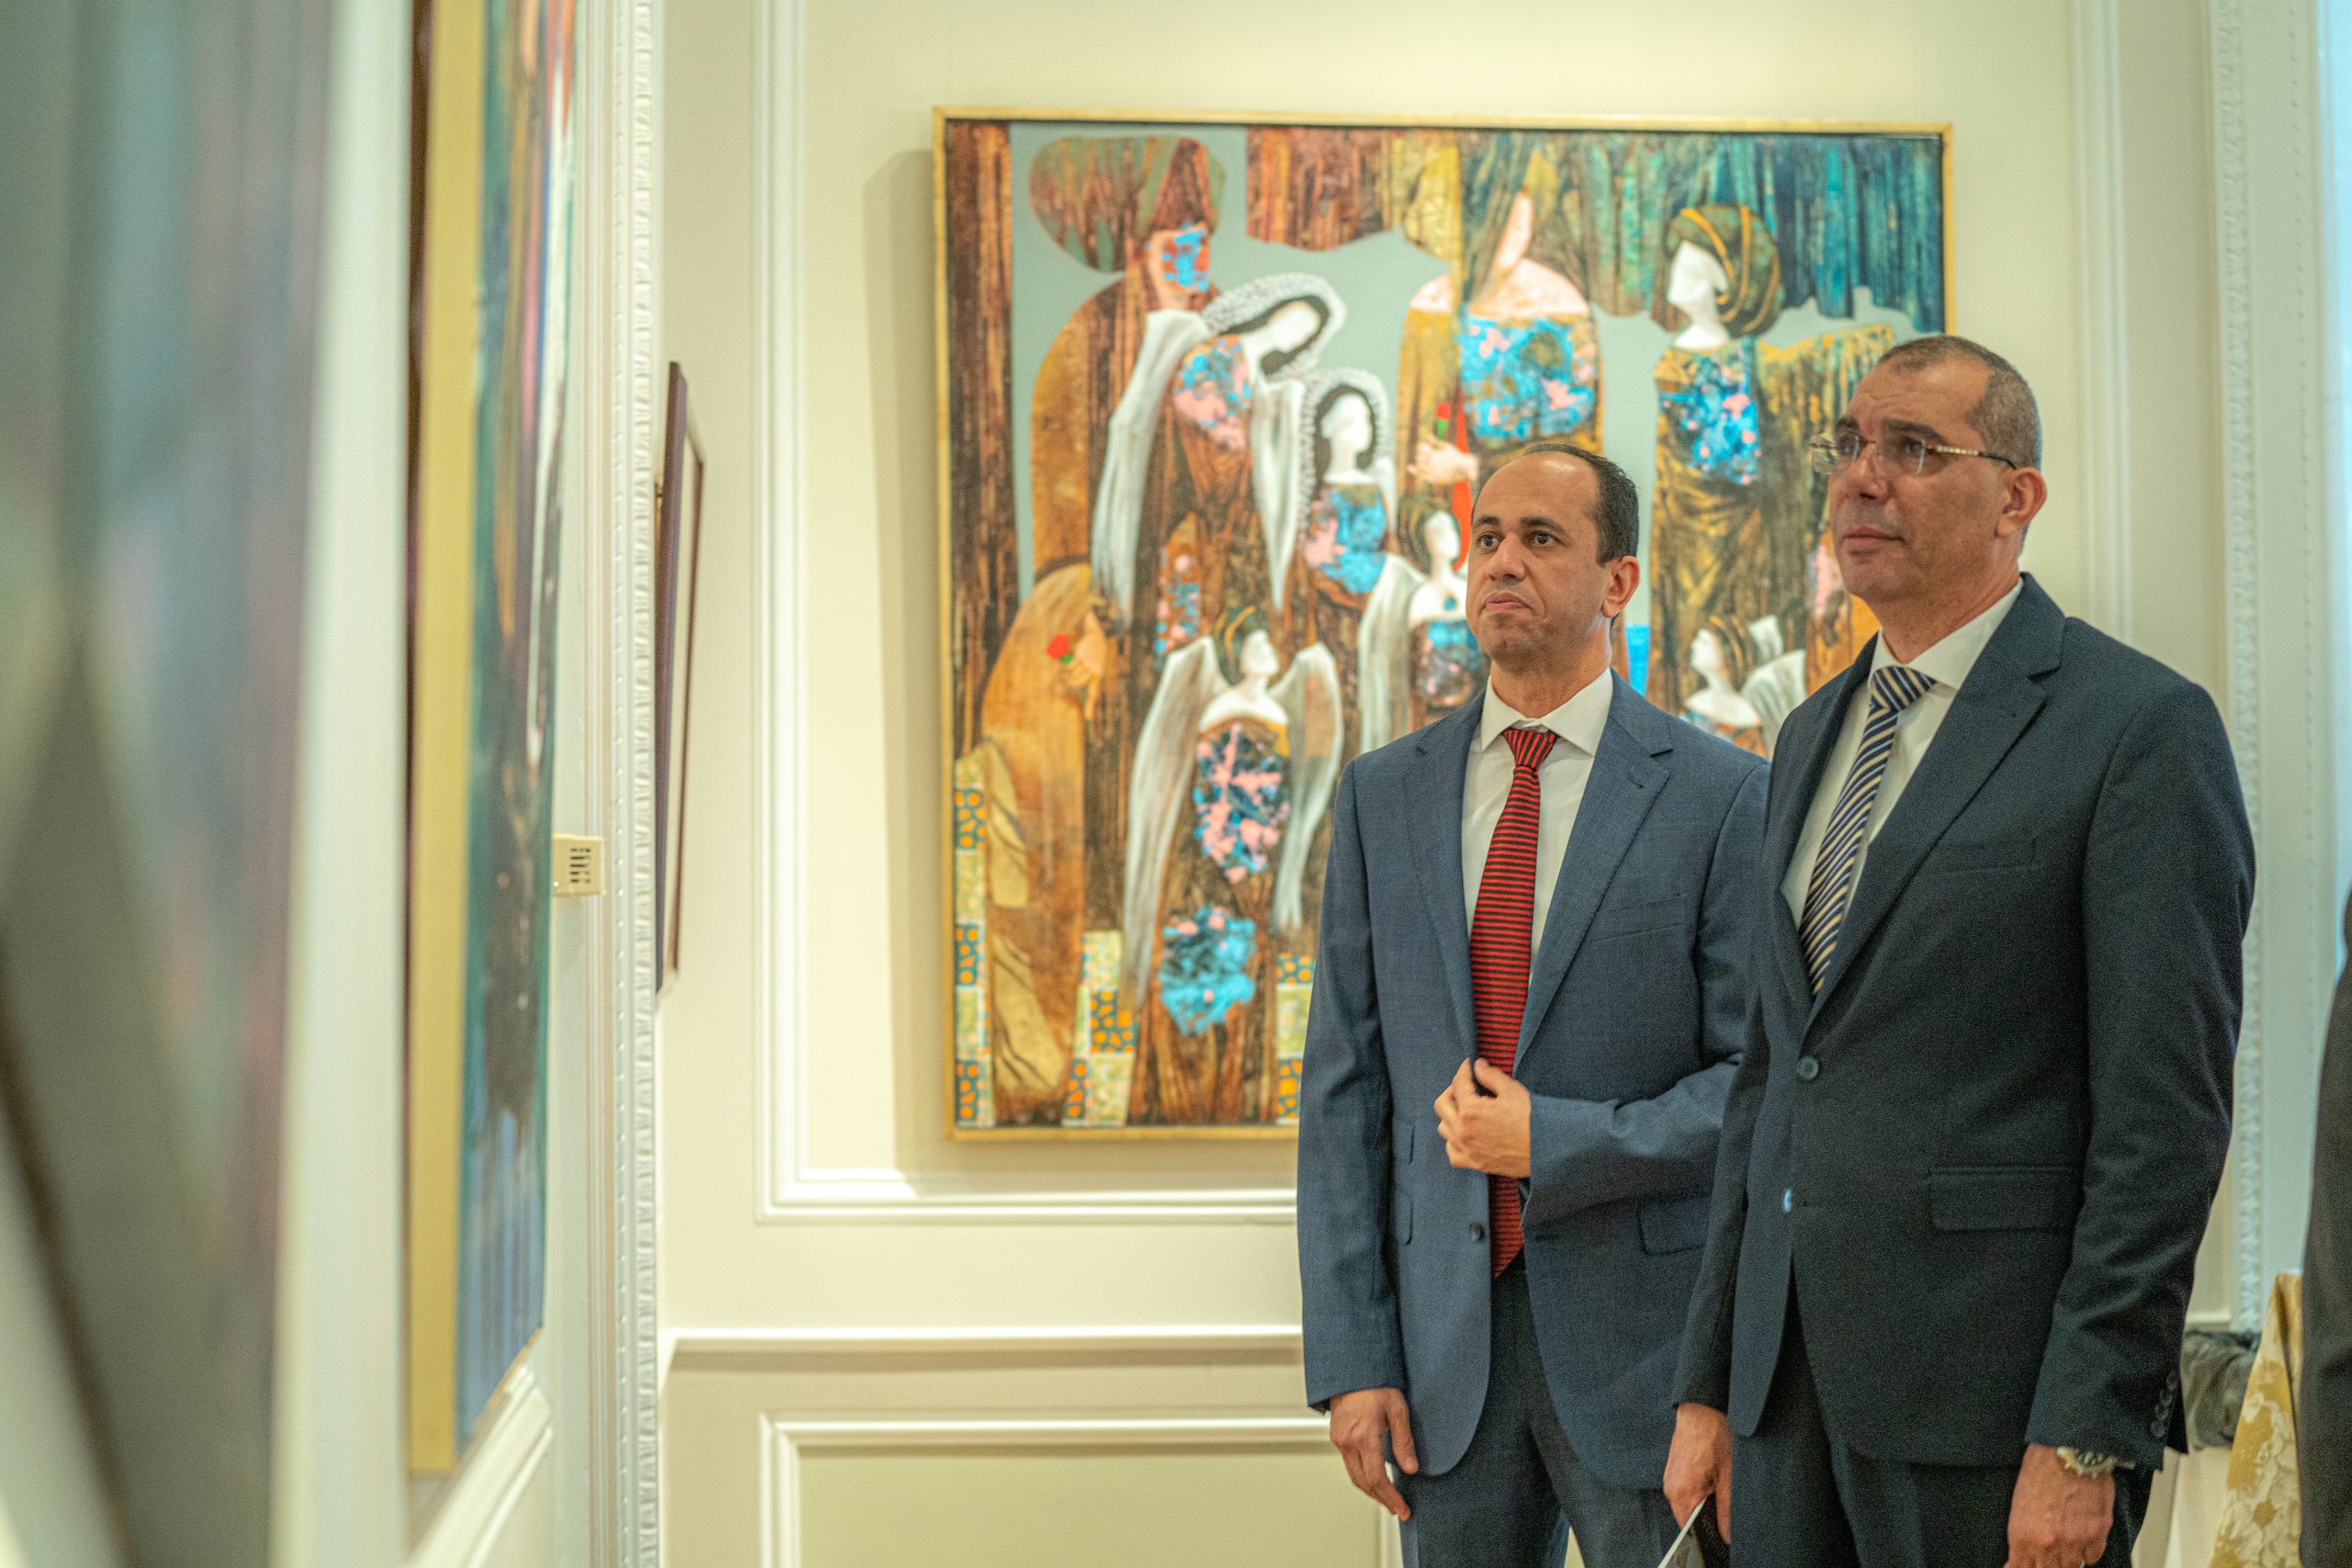 The Embassy of Egypt to the U.S. hosted an art show of 16 Egyptian artists at Meridian this summer. The exhibition kicked off the 100-year anniversary of Egypt-U.S. diplomatic relations.